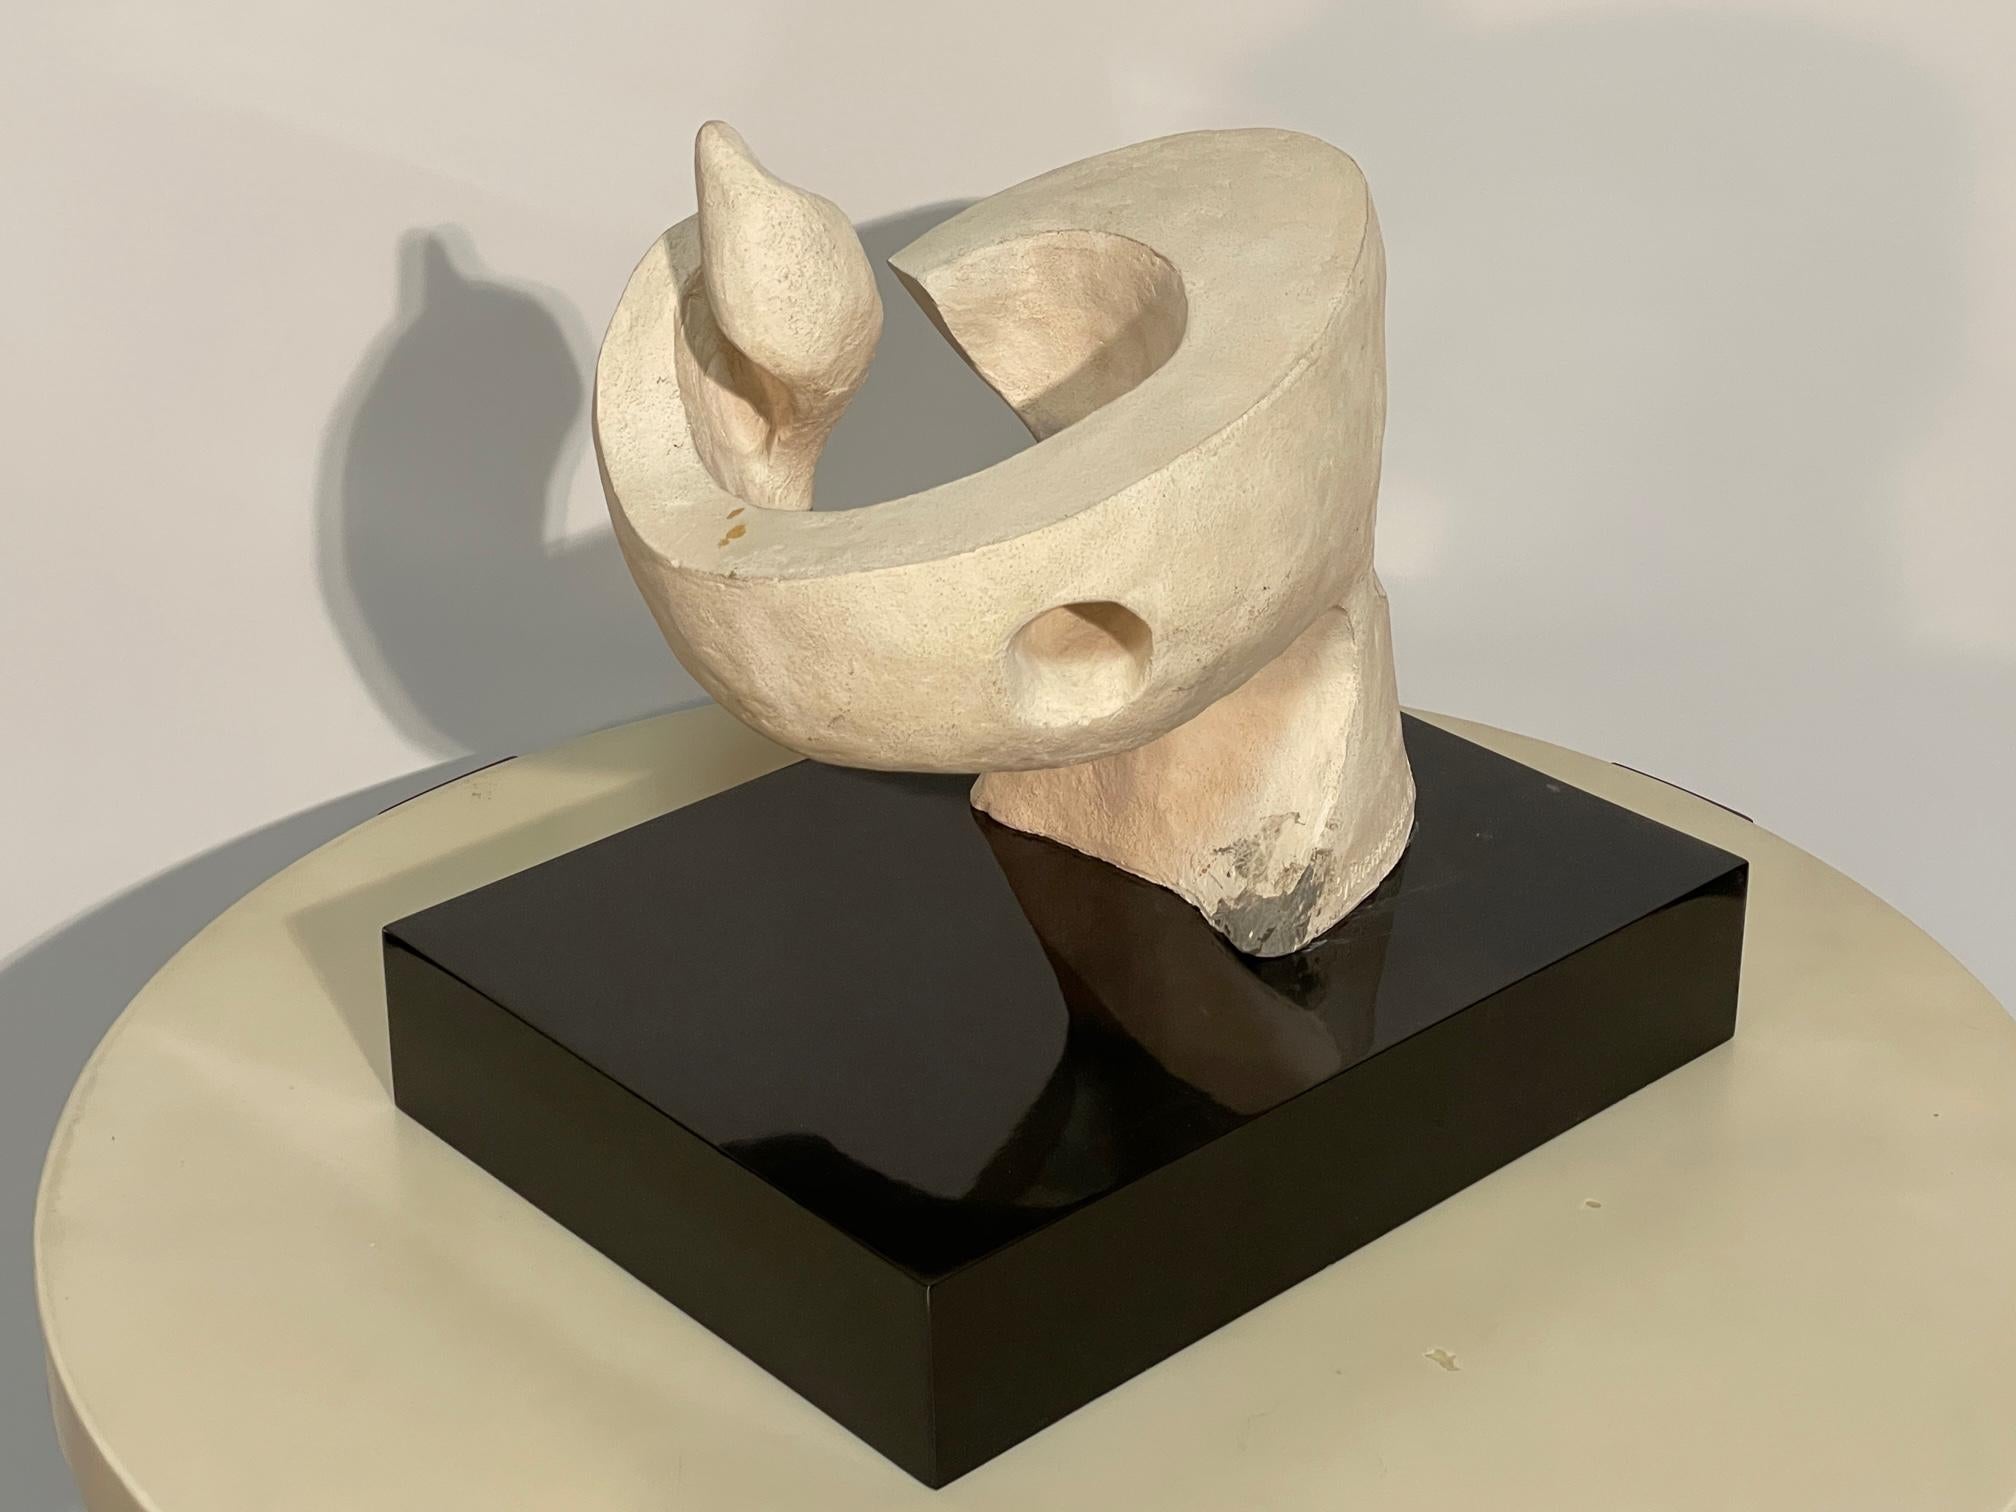 Sculptor Seymour F Rosenwasser (aka Sy Rosenwasser) is known for his abstract modernist work with plaster and bronze.  This untitled abstract plaster piece flows up from the base then abruptly changes direction into a swirling organic movement